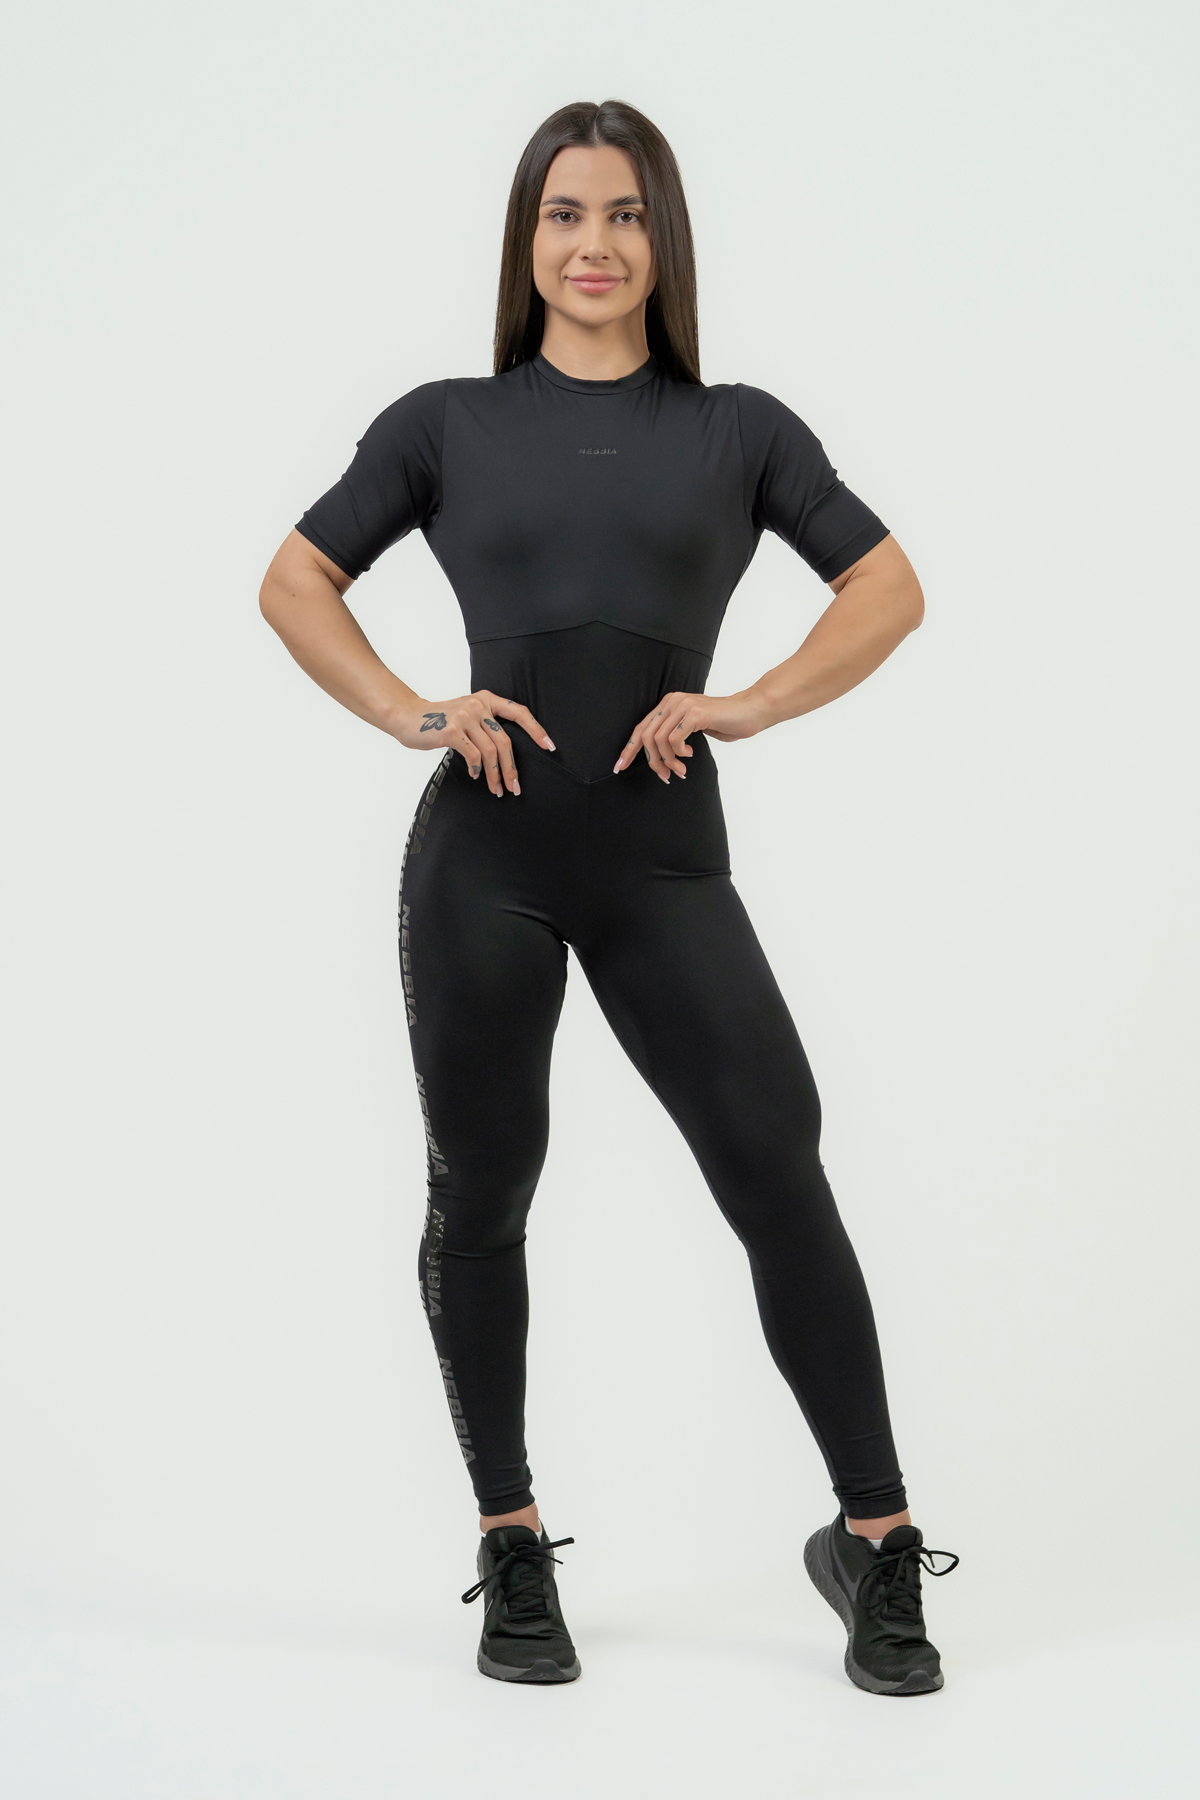 Modern Jumpsuit Fitness - Fitness And Fashion For You - Buy Online